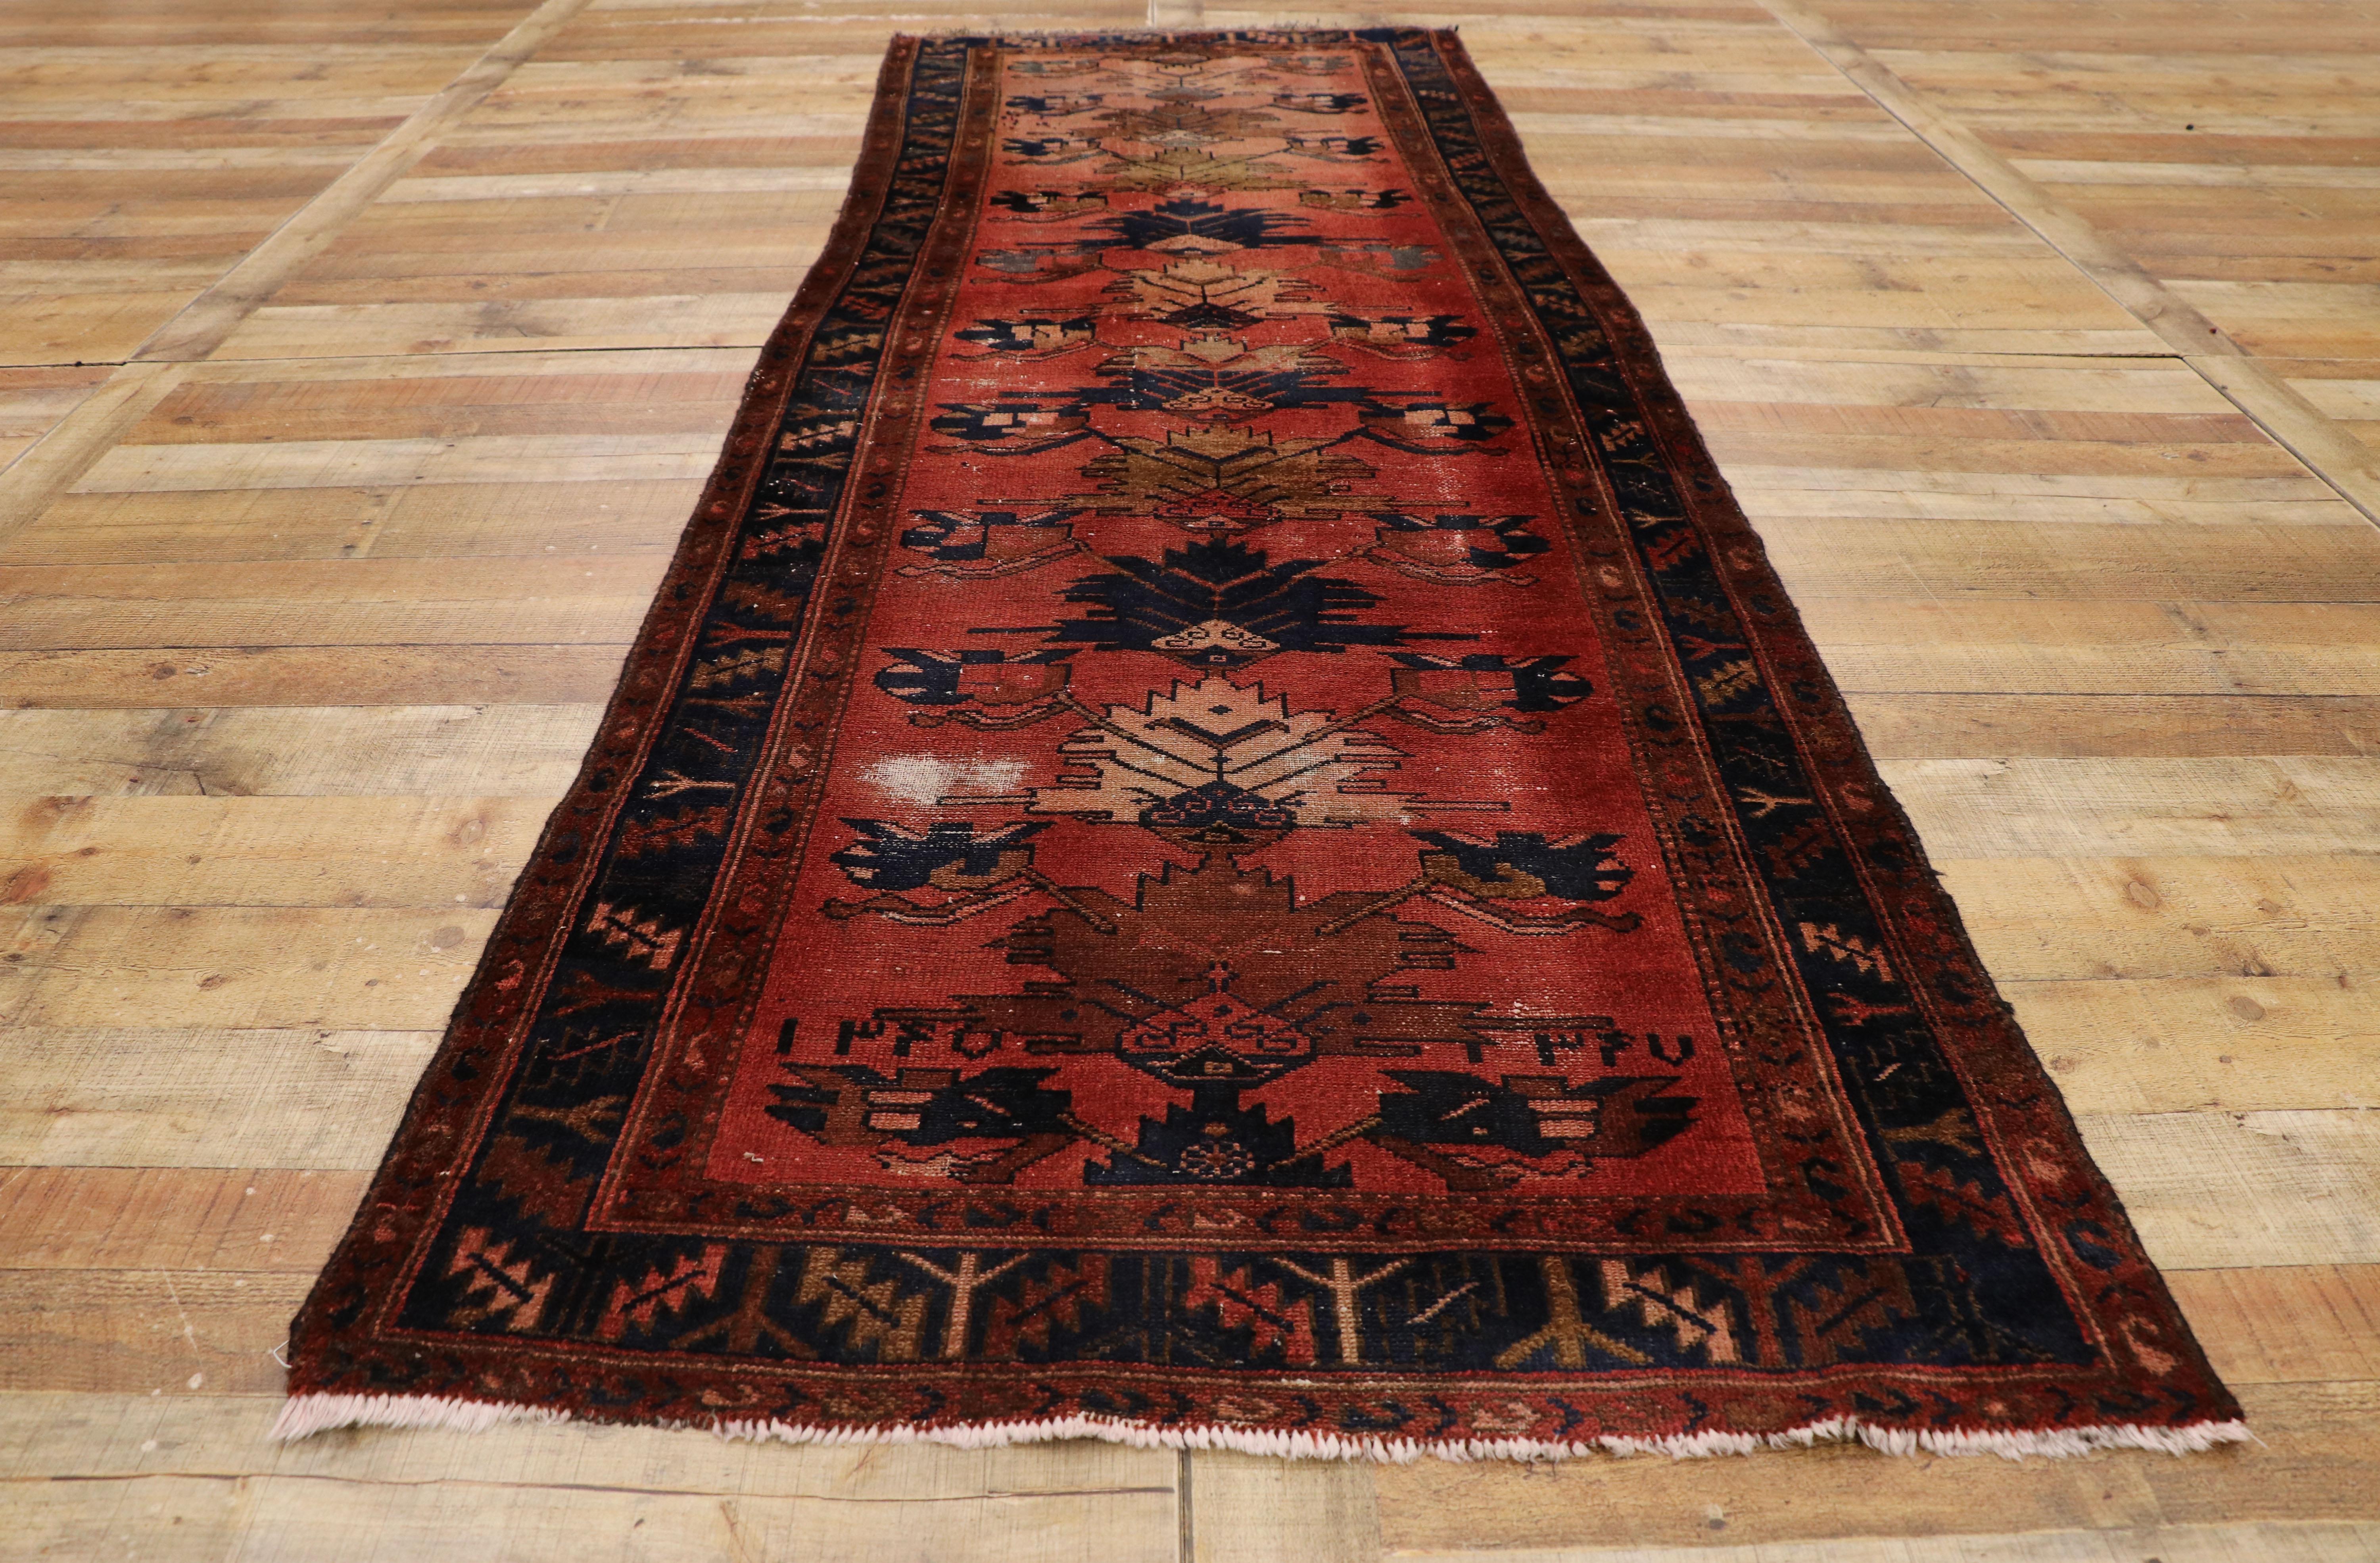 Wool Distressed Antique Persian Hamadan Runner with Rustic English Manor Tudor Style For Sale